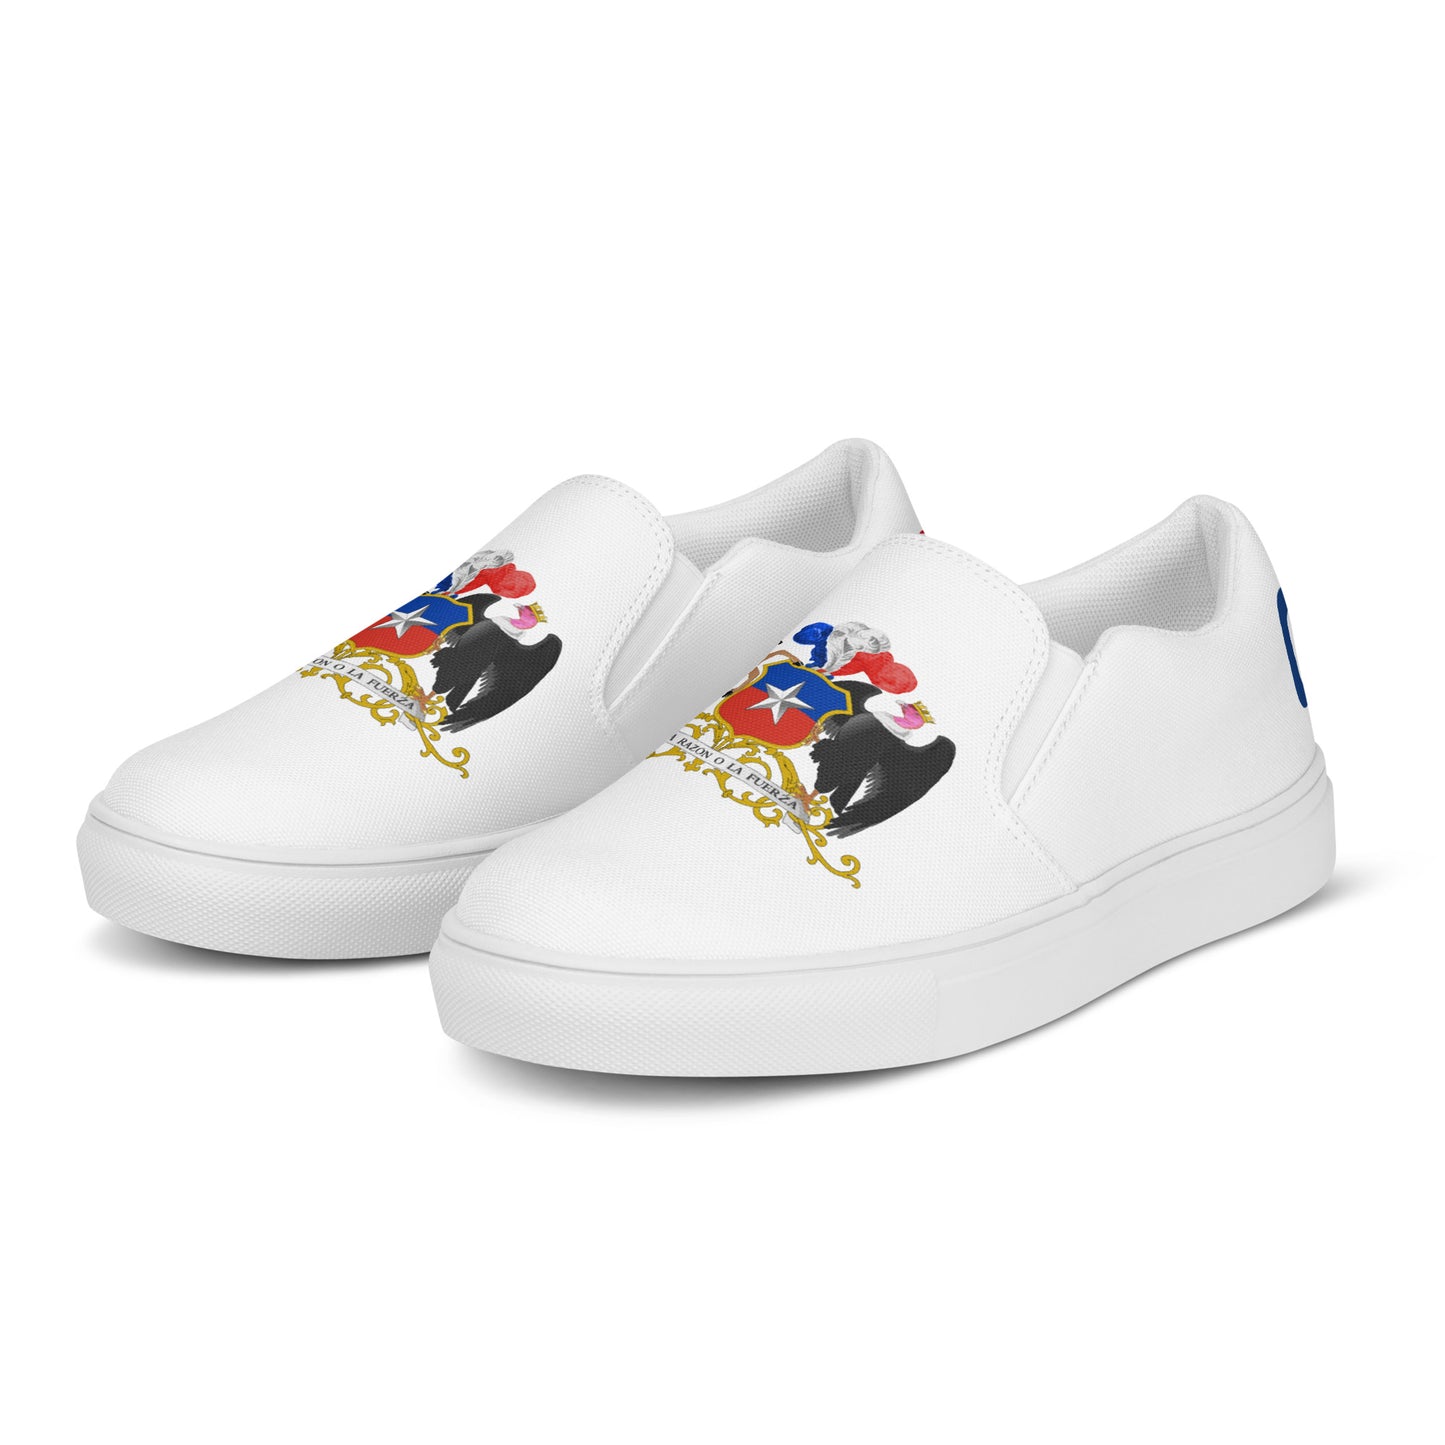 Chile - Women - White - Slip-on shoes